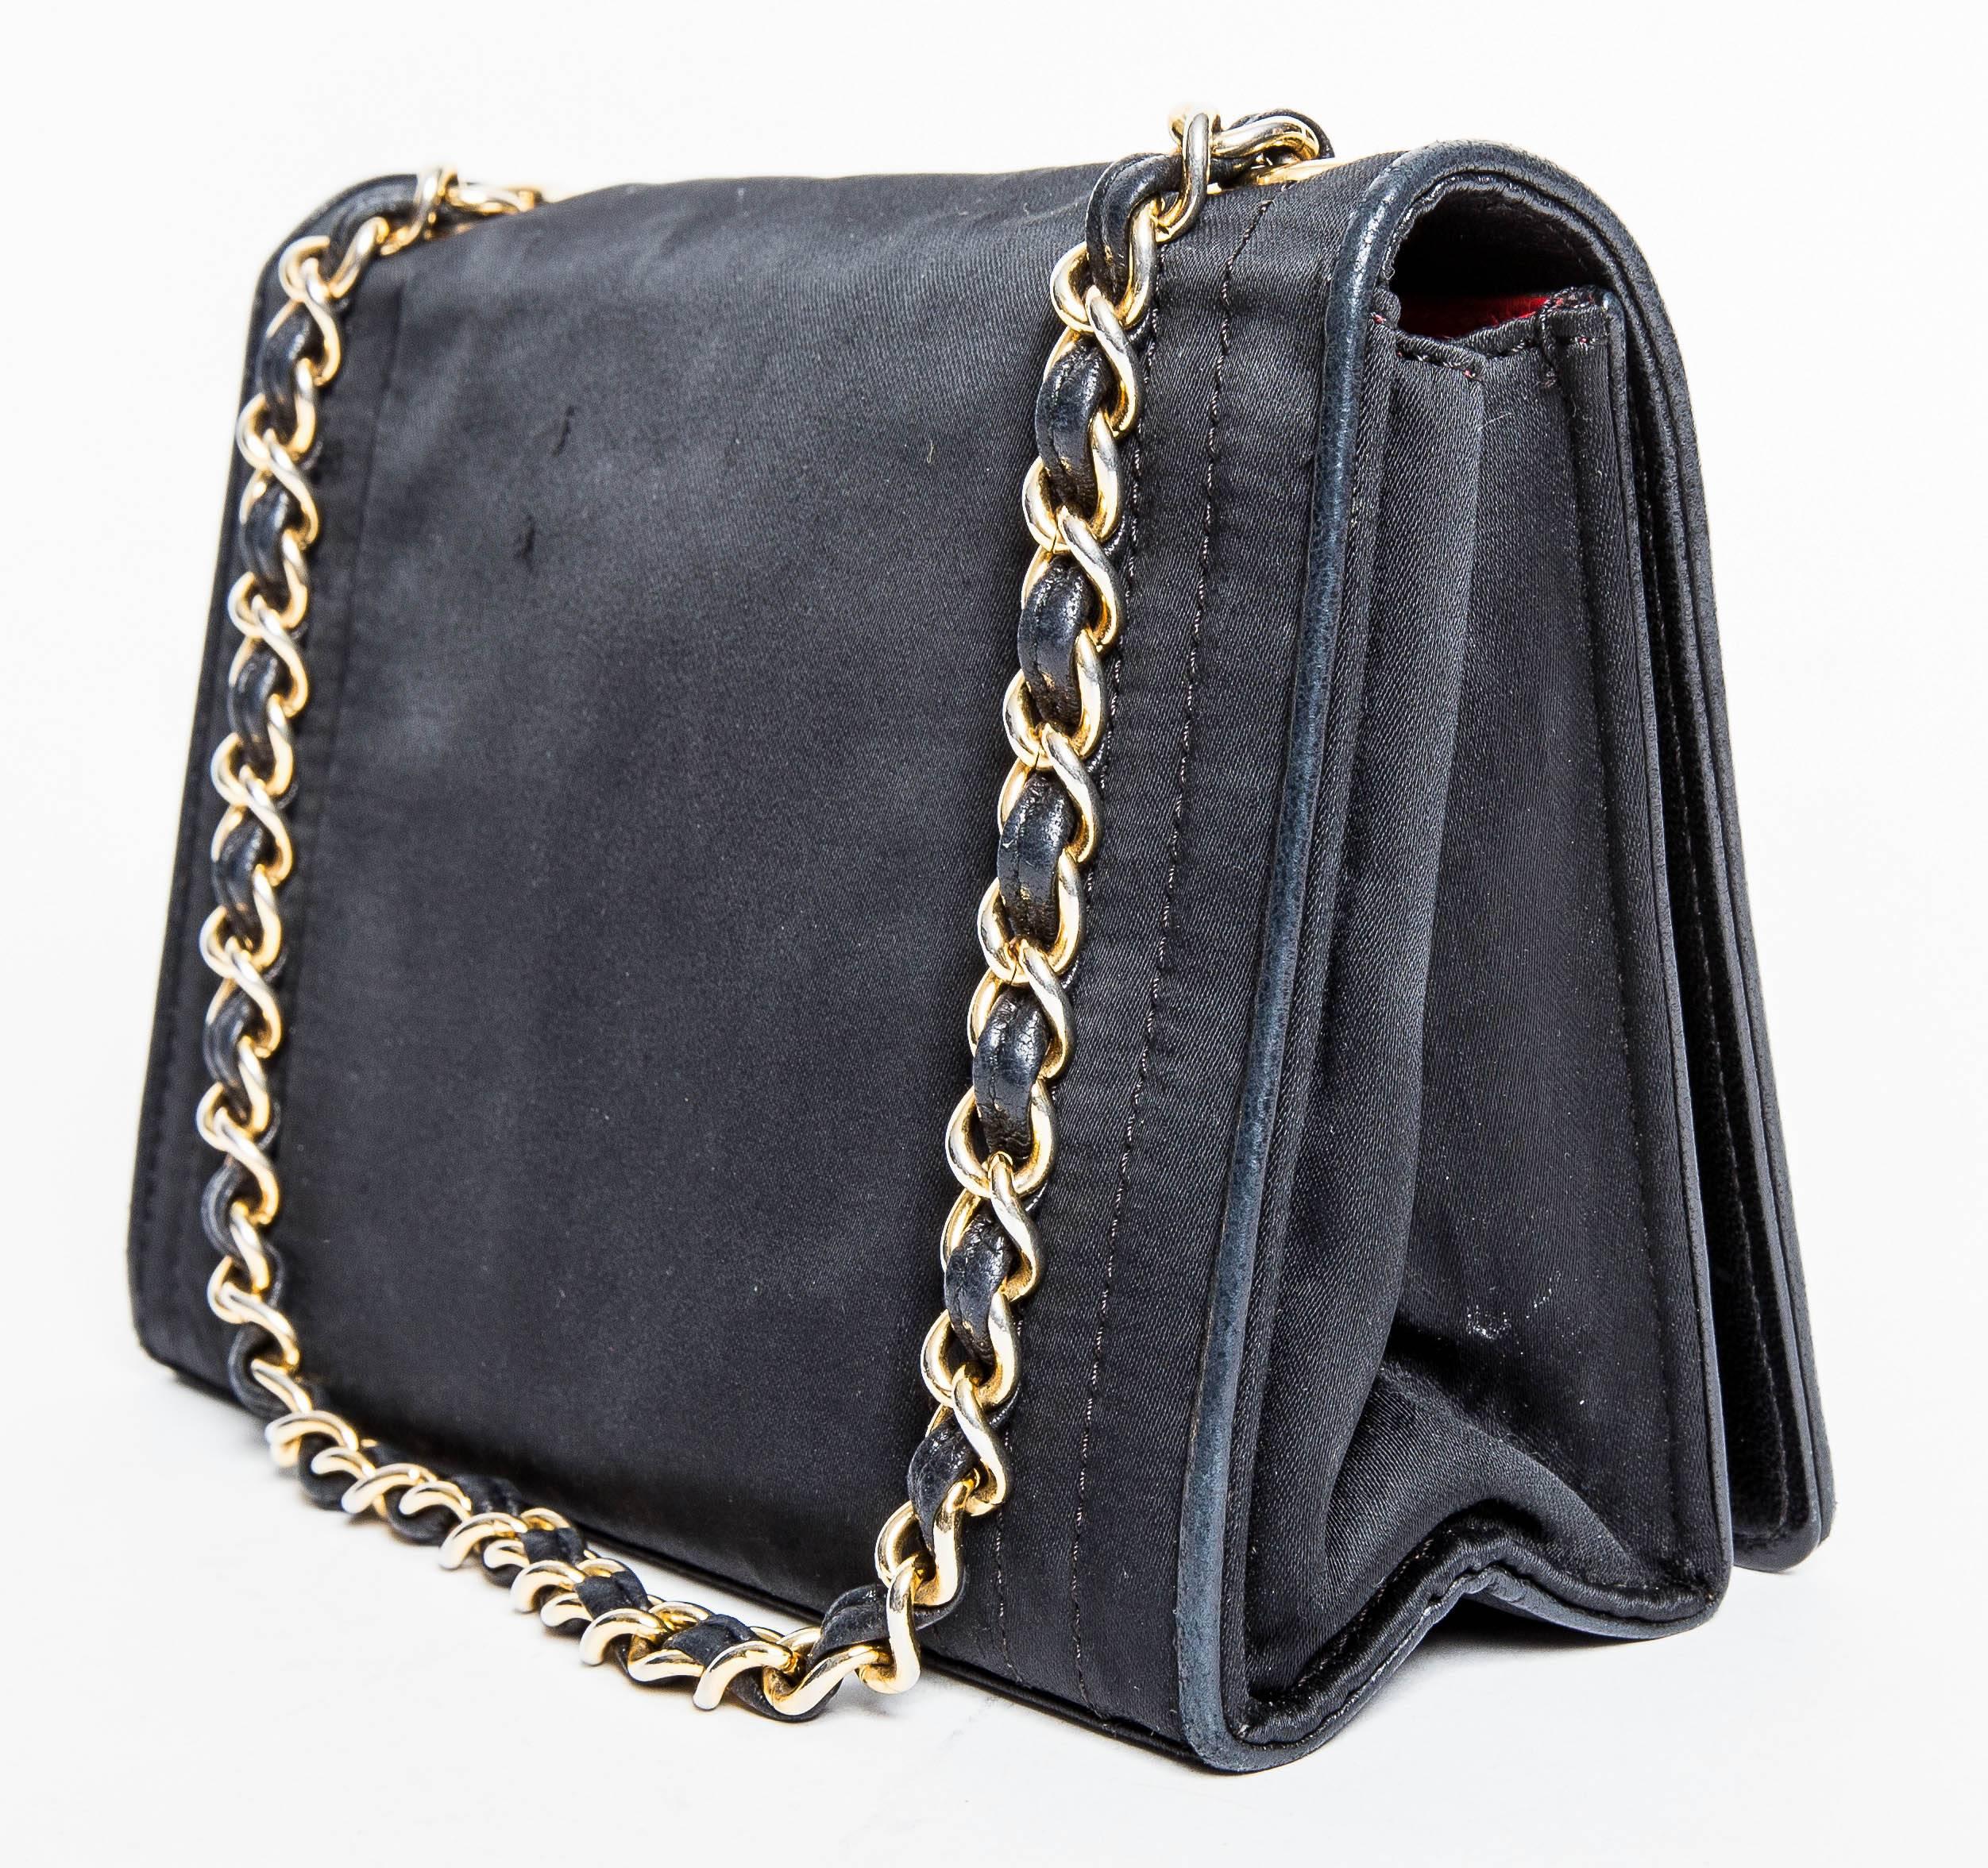 Women's Chanel Black Silk Single Flap Evening Bag with Chain